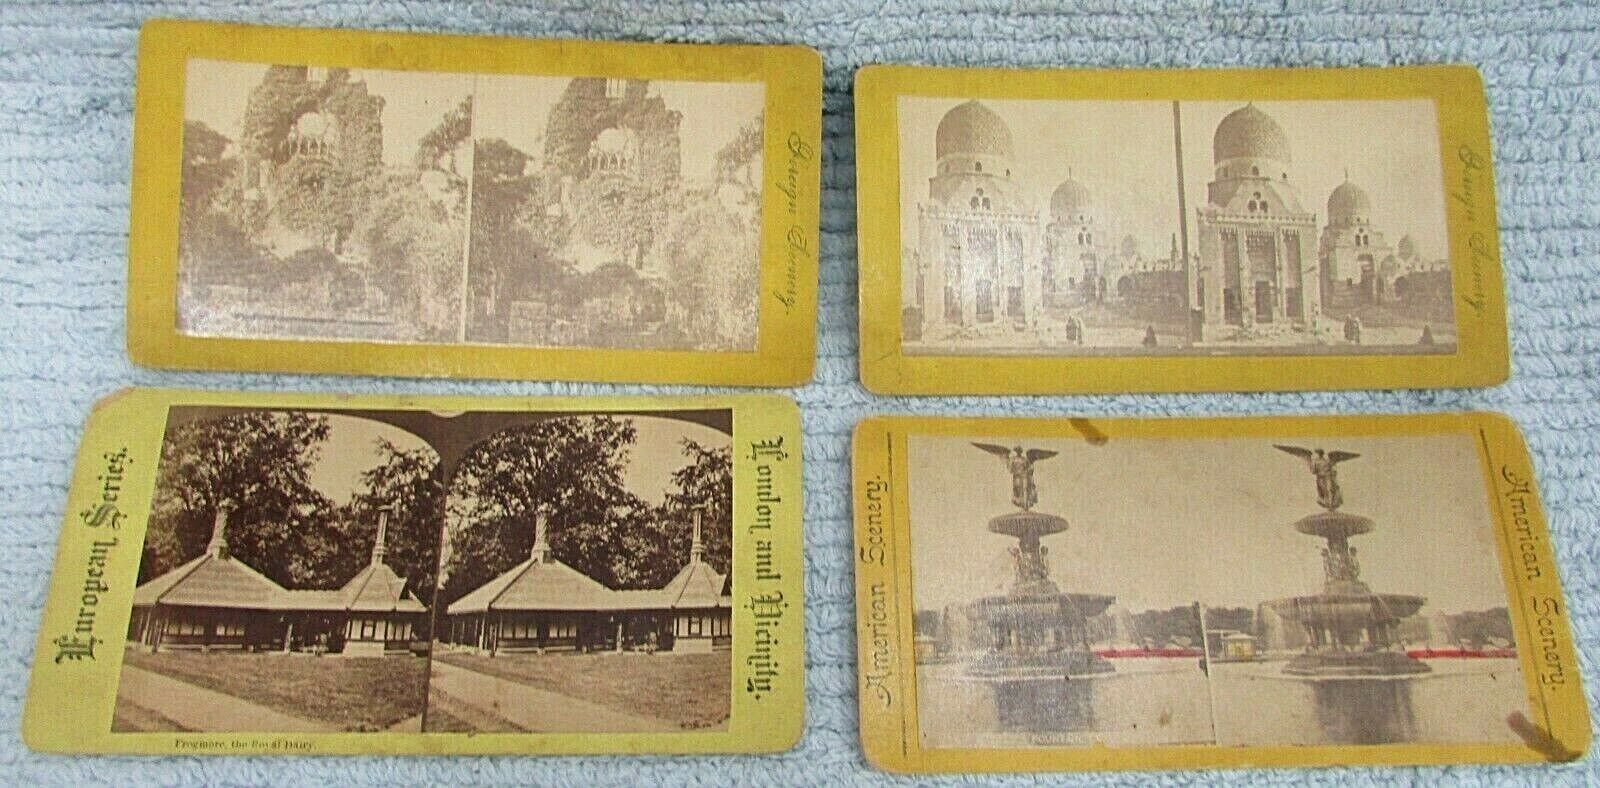 4 Antique Stereo Views Old American Foreign Scenery Stereoscope Photos FREE S/H